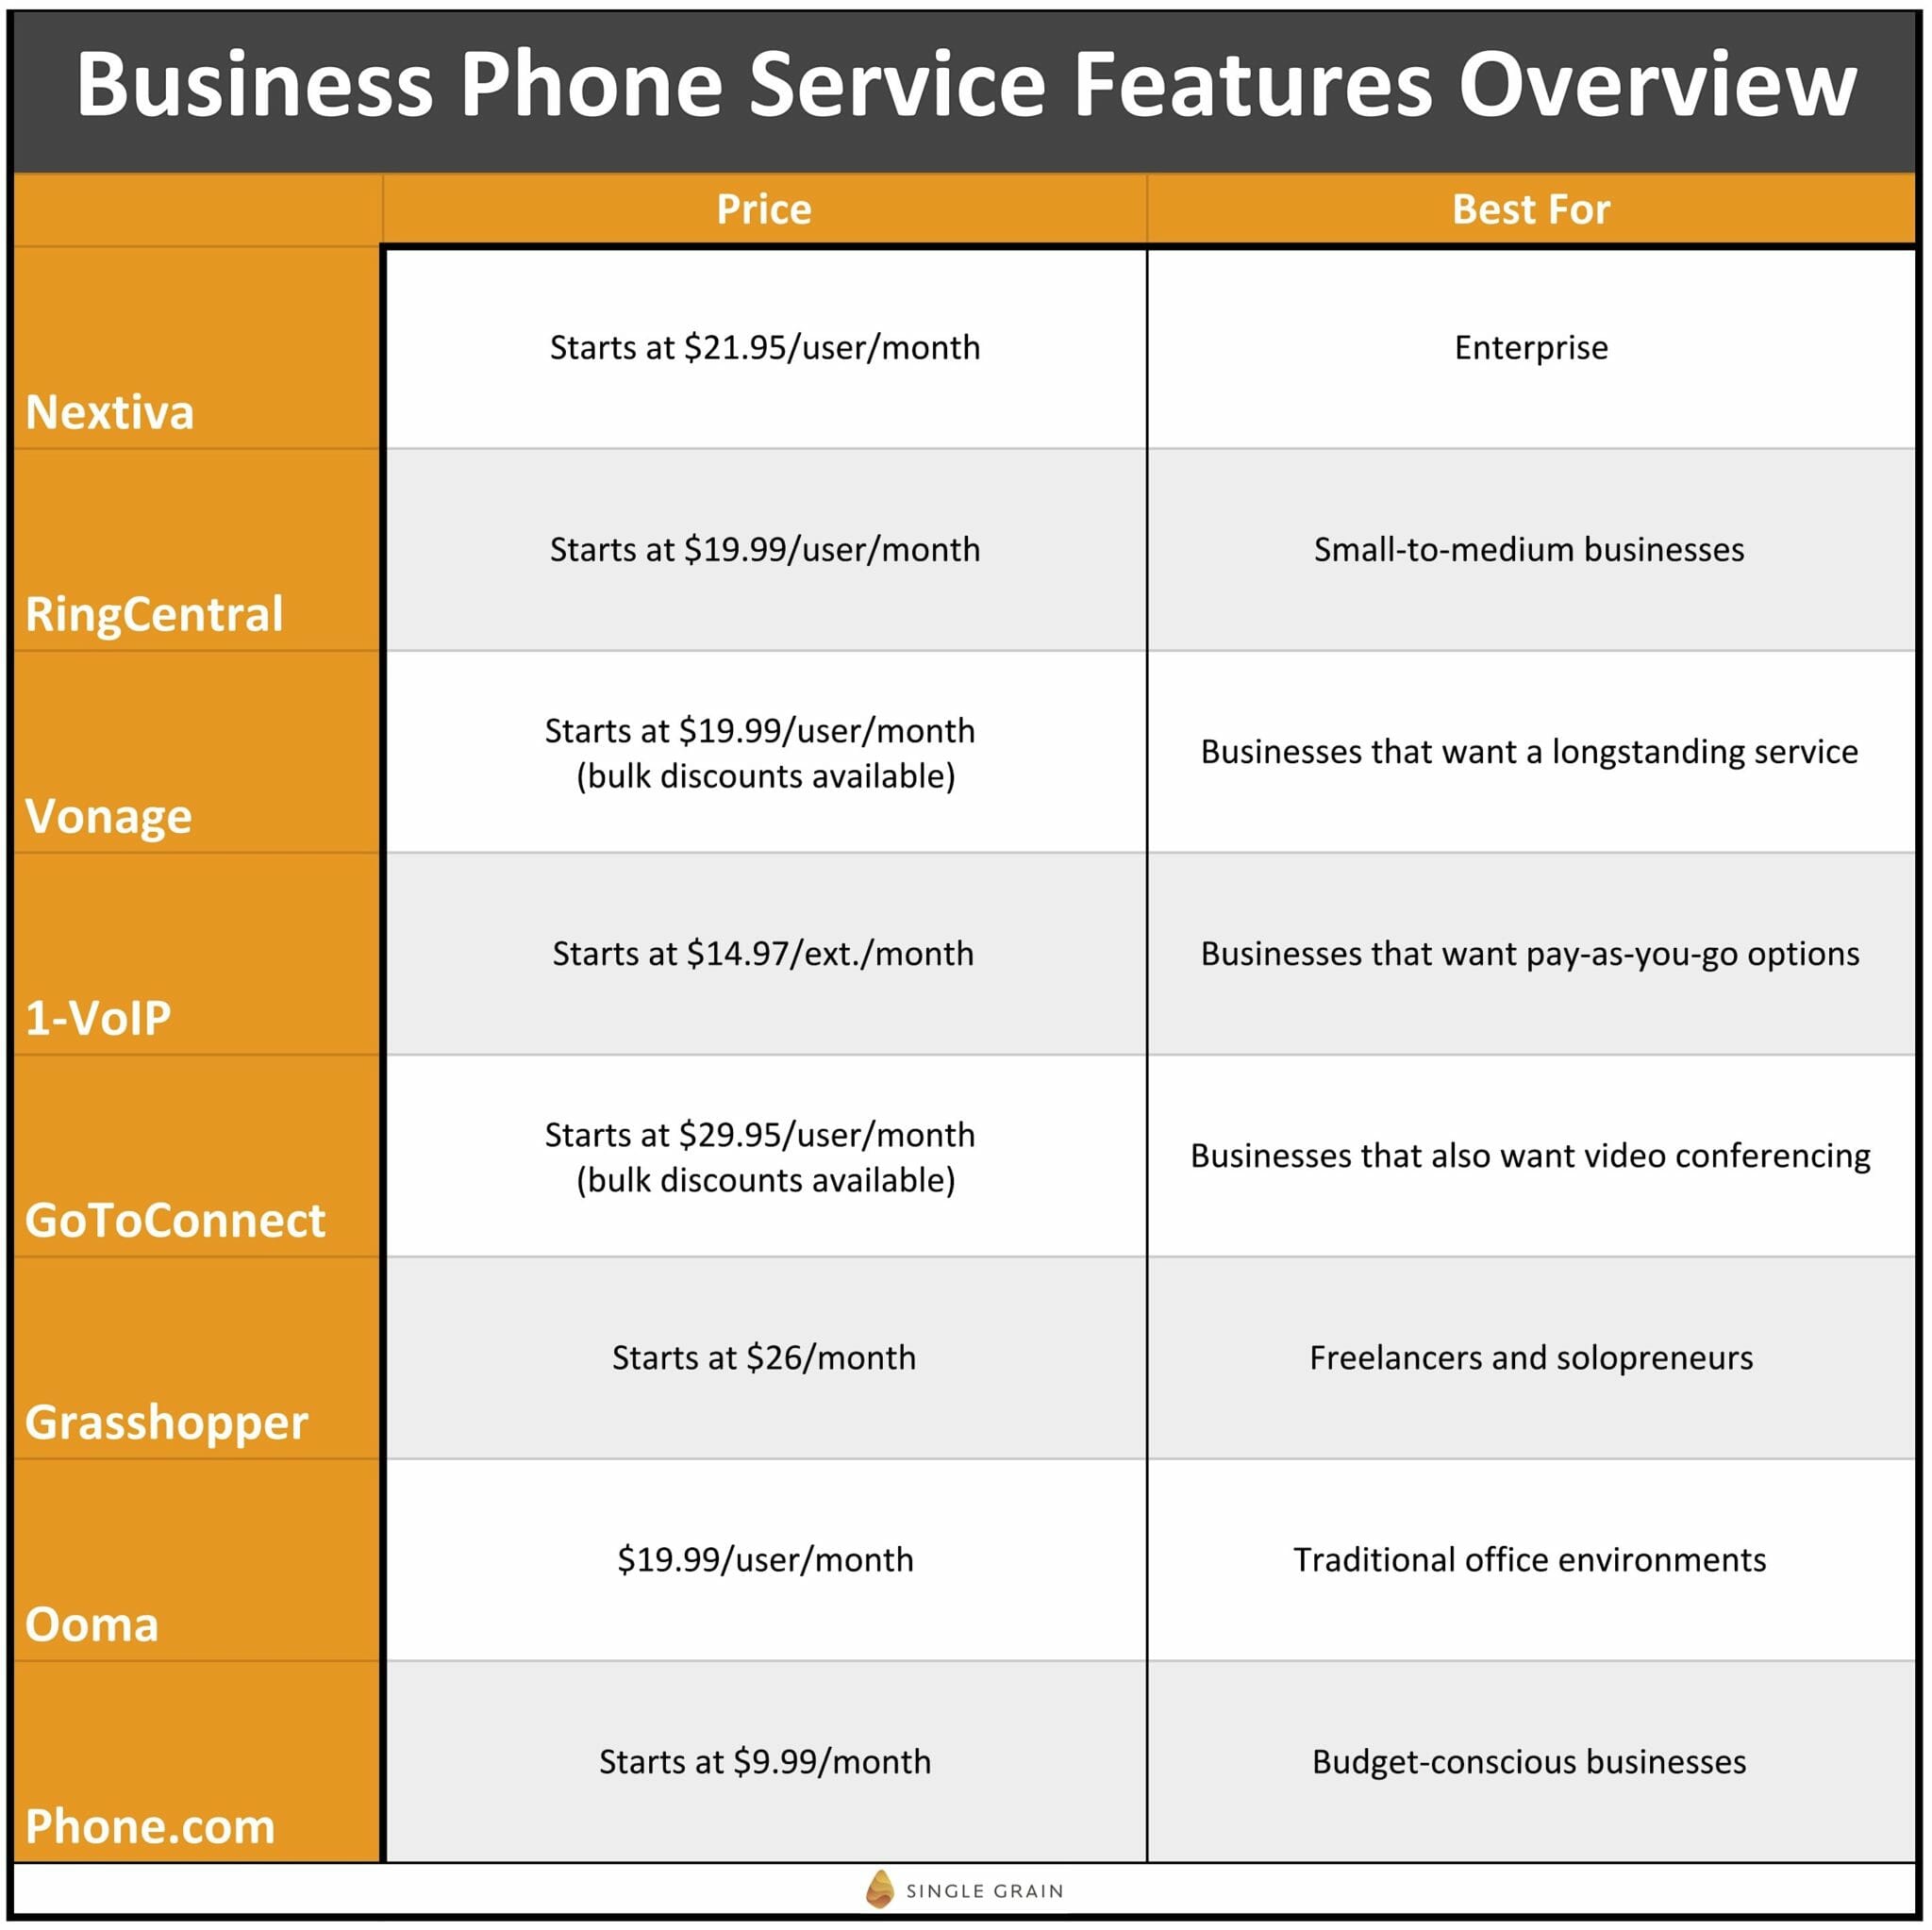 Business Phone Service Features Overview